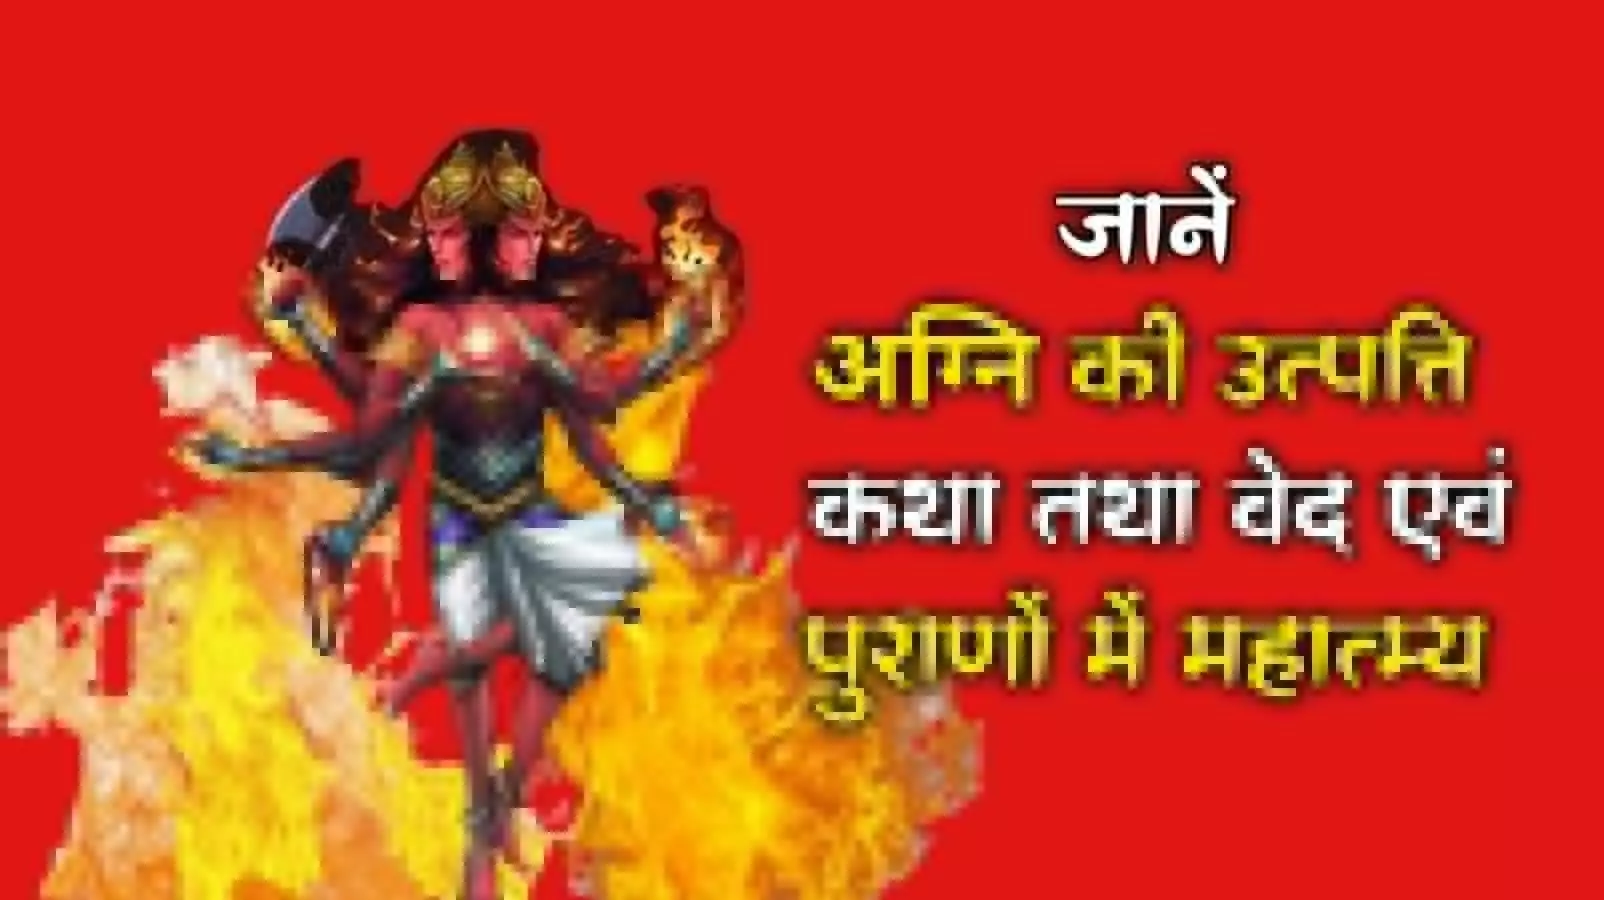 agni how fire originated and origin story of Fire and importance in vedas and puranas